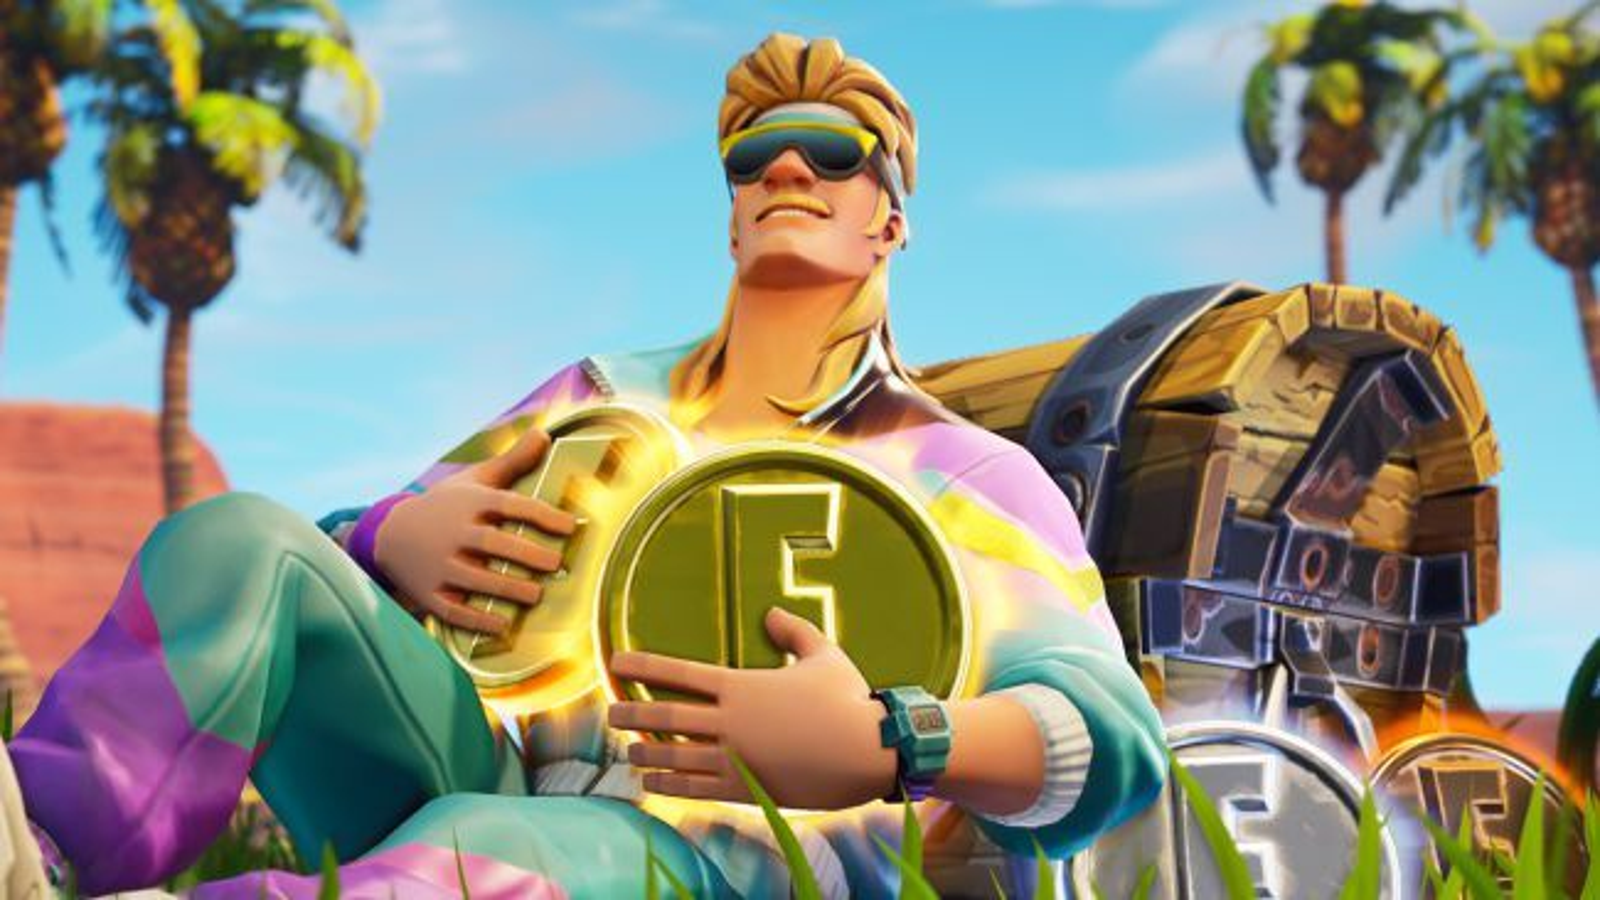 Judge Says No to Putting 'Fortnite' Back on Apple's App Store